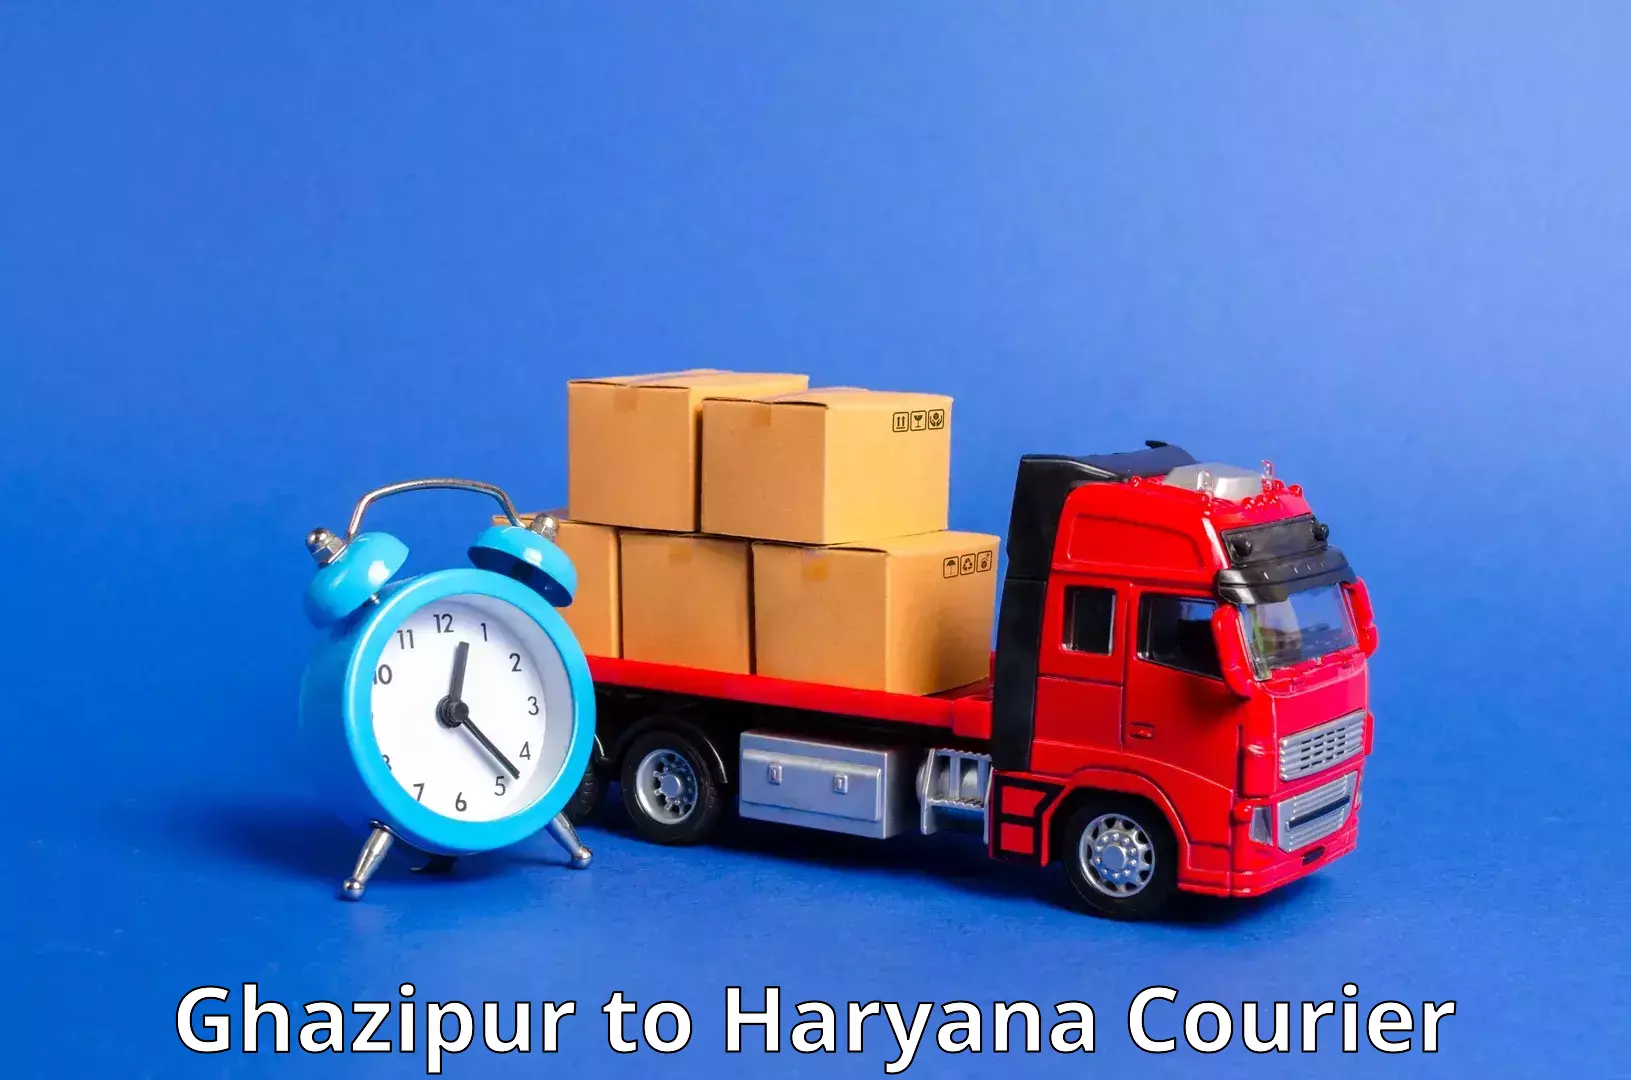 24-hour courier services Ghazipur to NCR Haryana